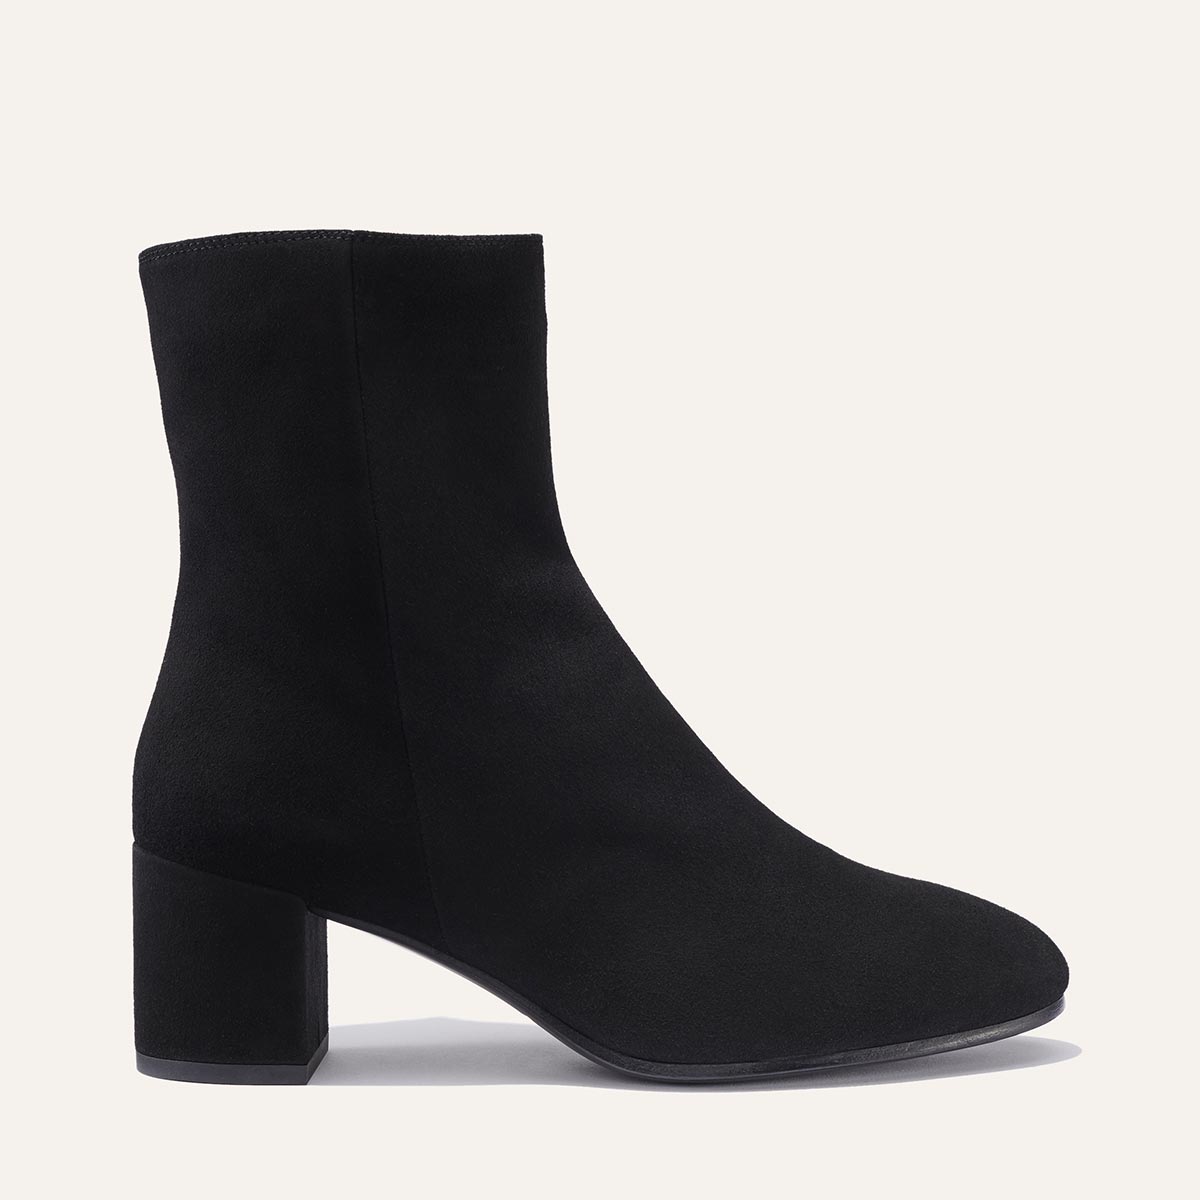 Margaux's classic ankle Boot in black suede with a comfortable block heel